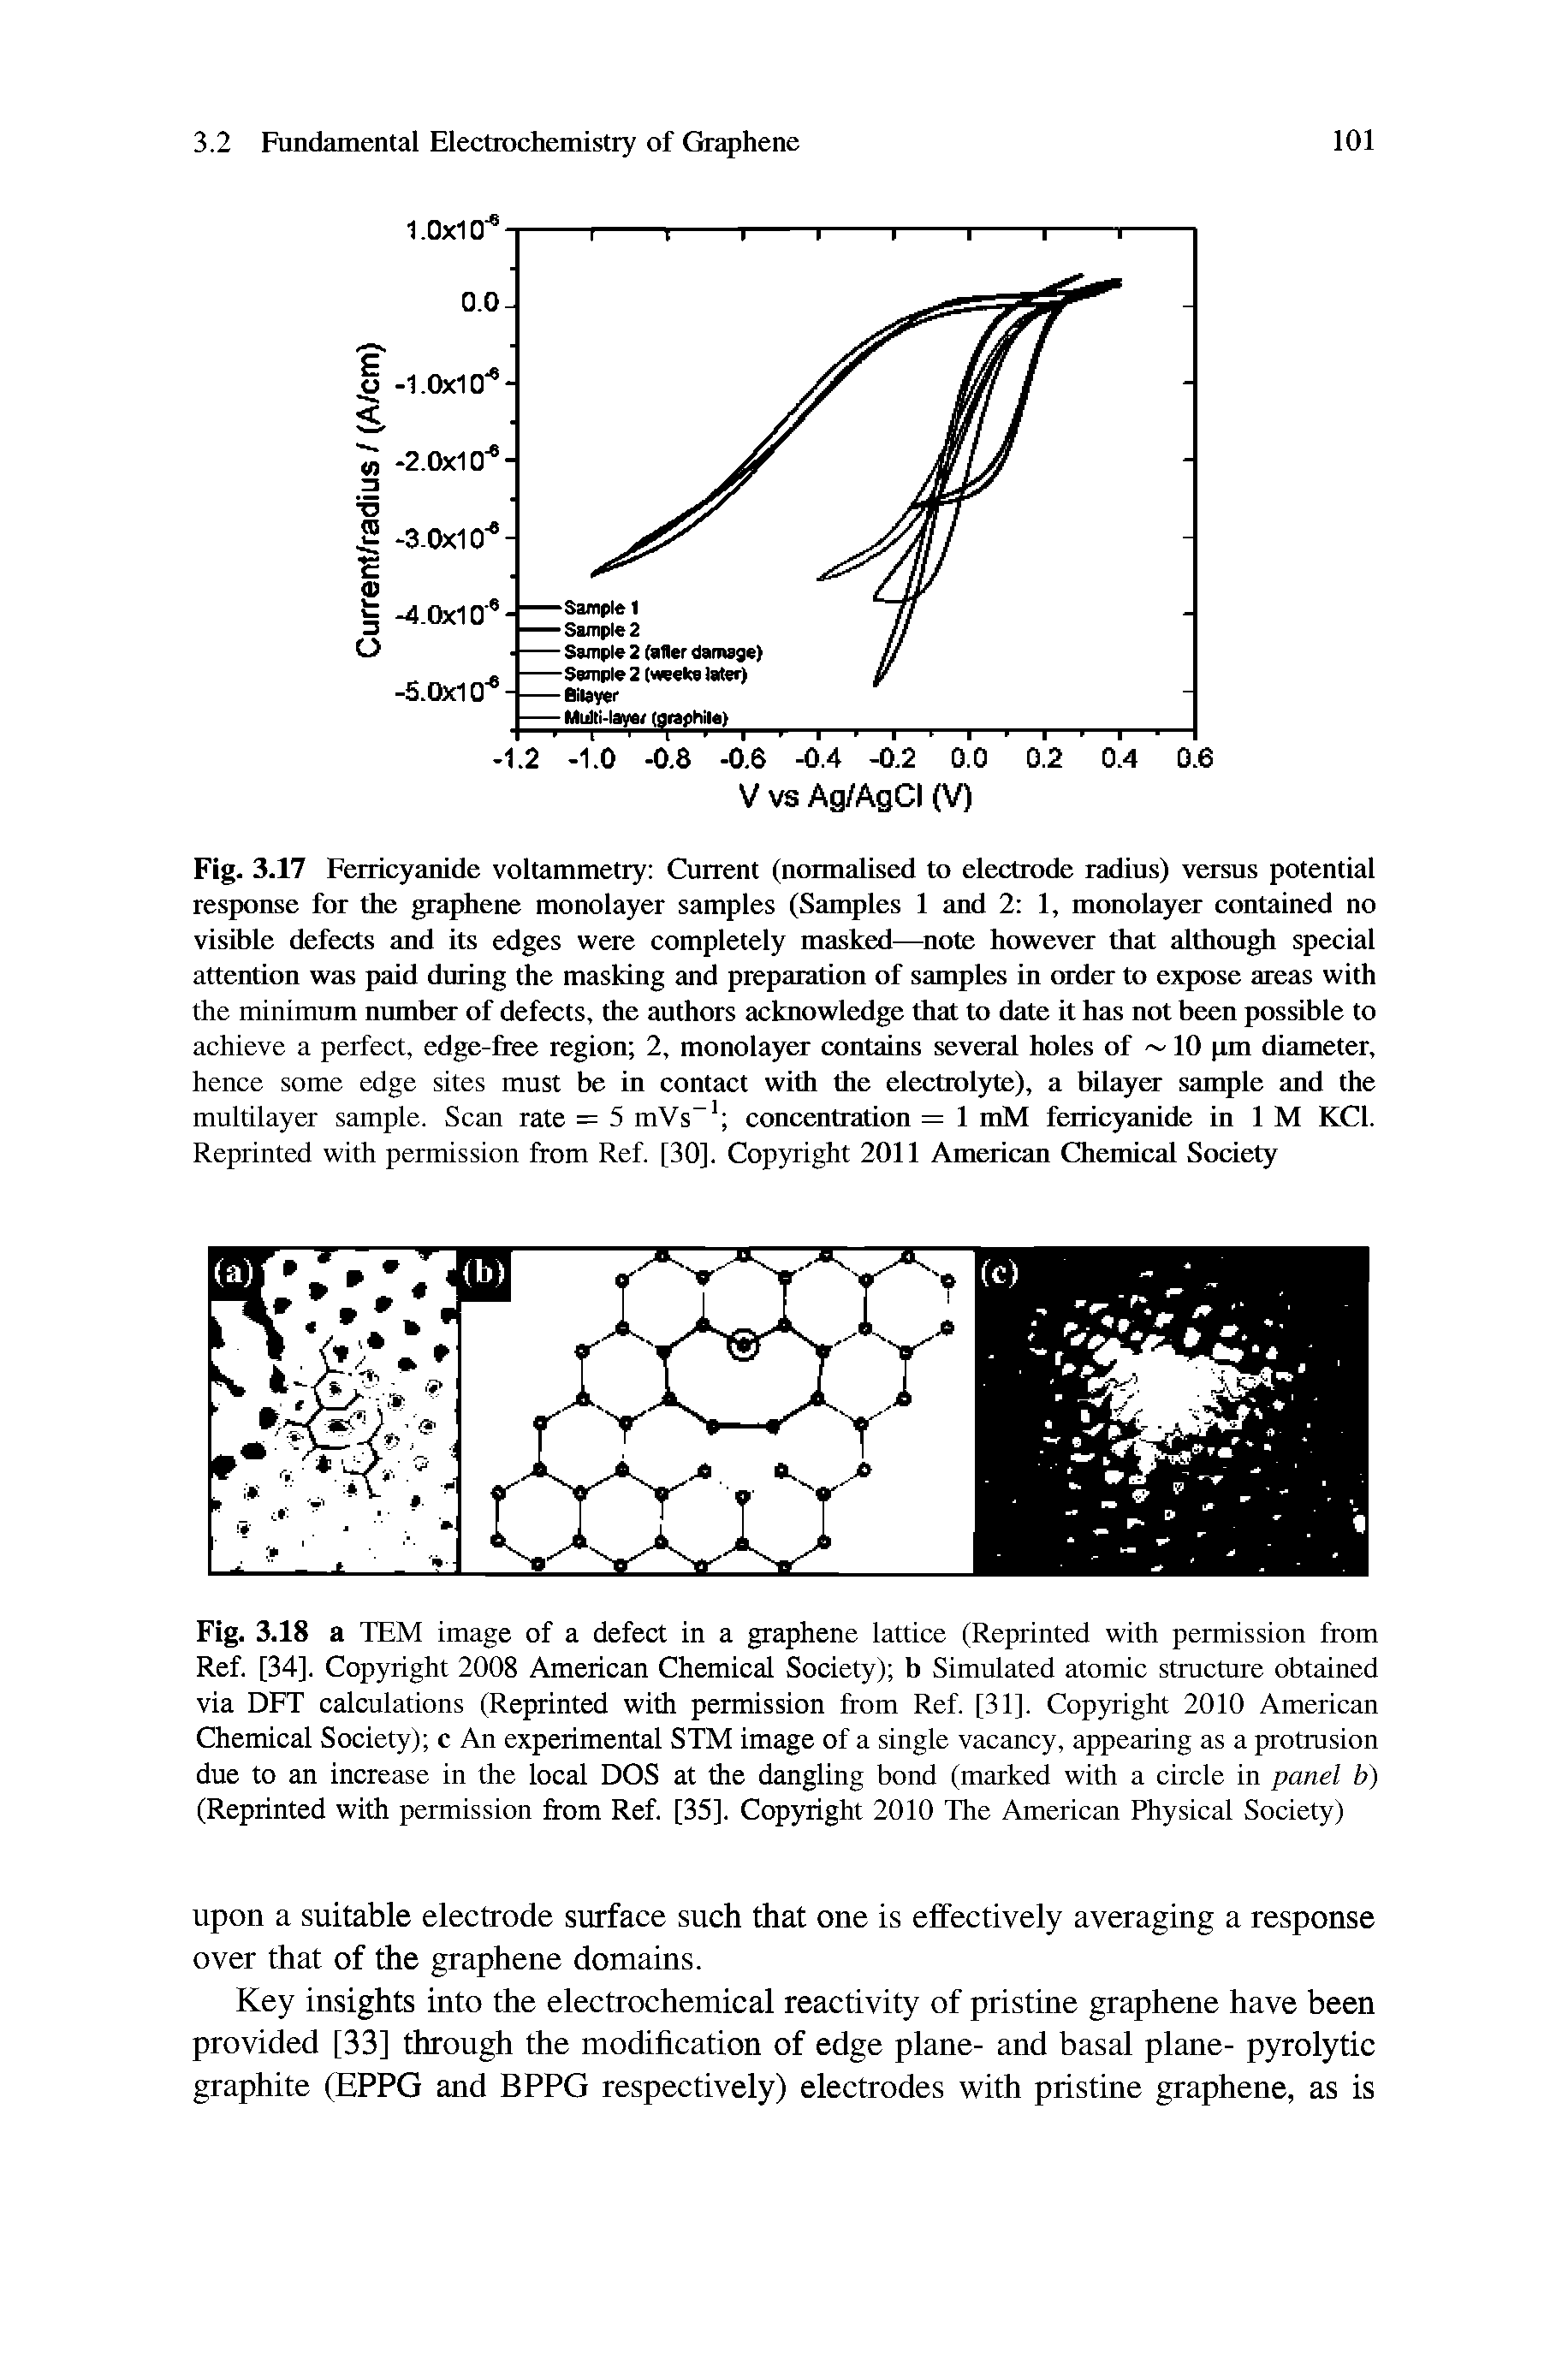 Fig. 3.17 Ferricyanide voltammetry Current (normalised to electrode radius) versus potential response for the graphene monolayer samples (Samples 1 and 2 1, monolayer contained no visible defects and its edges were completely masked—note however that although special attention was paid during the masking and preparation of samples in order to expose areas with the minimum number of defects, the authors acknowledge that to date it has not been possible to achieve a perfect, edge-fiee region 2, monolayer contains several holes of 10 pm diameter, hence some edge sites must be in contact with the electrolyte), a bilayer sample and the multilayer sample. Scan rate = 5 mVs concentration = 1 mM ferricyanide in 1 M KCl. Reprinted with permission from Ref. [30], Copyright 2011 American Chemical Society...